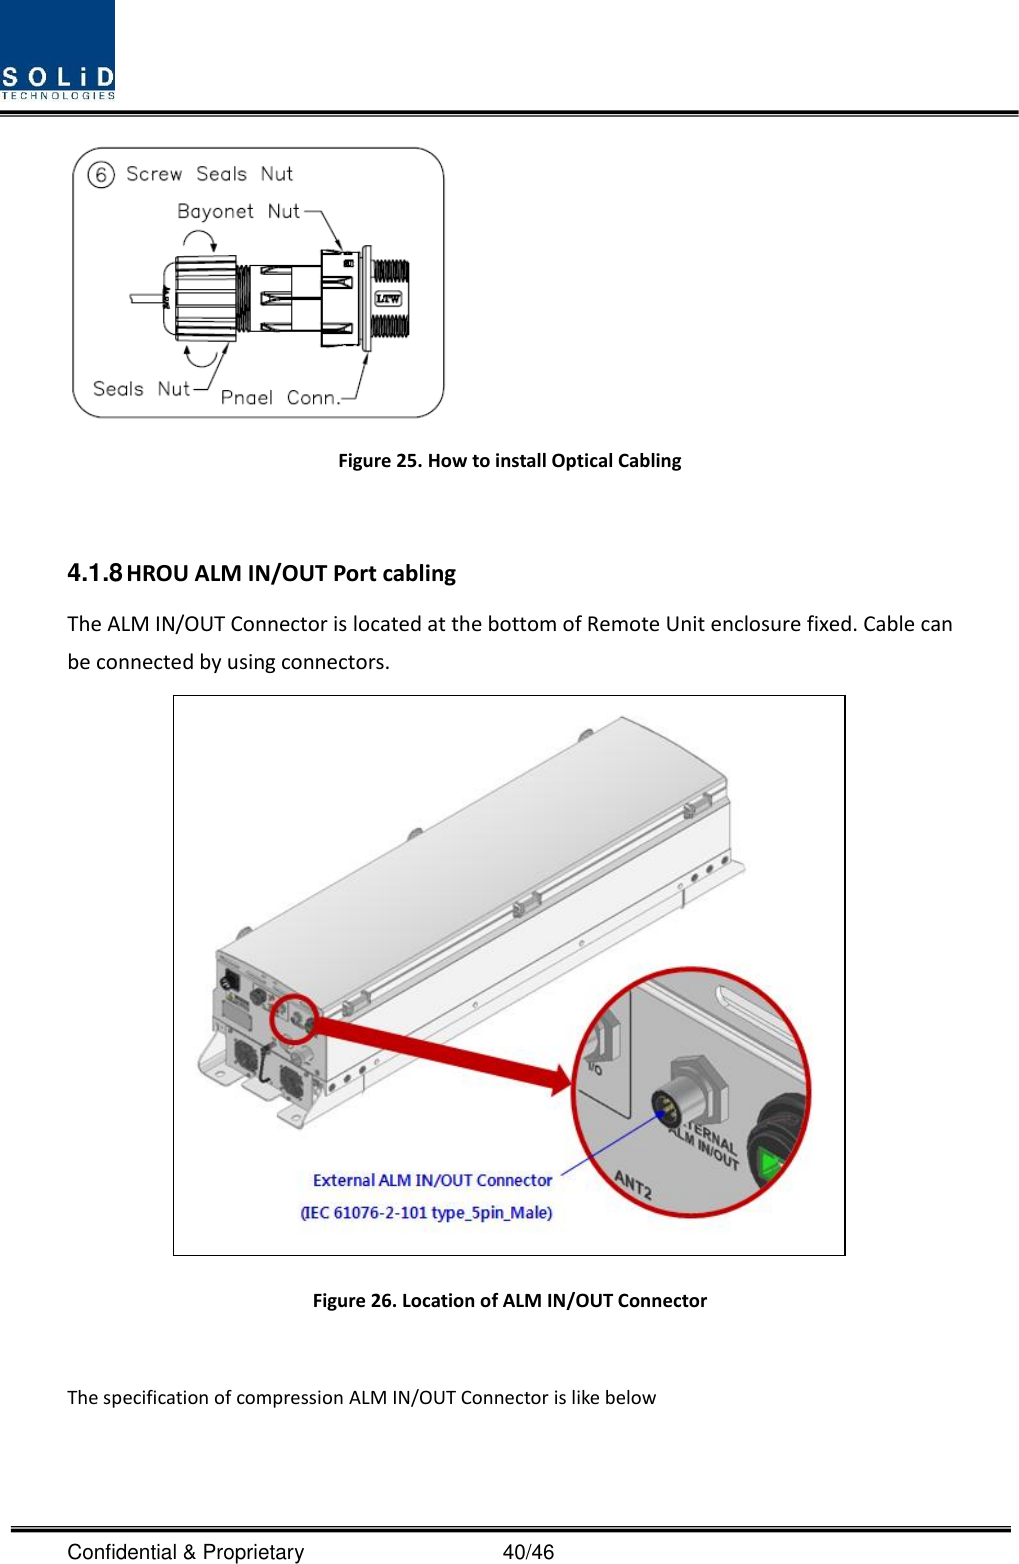  Confidential &amp; Proprietary                                      40/46  Figure 25. How to install Optical Cabling  4.1.8 HROU ALM IN/OUT Port cabling The ALM IN/OUT Connector is located at the bottom of Remote Unit enclosure fixed. Cable can be connected by using connectors.  Figure 26. Location of ALM IN/OUT Connector  The specification of compression ALM IN/OUT Connector is like below 